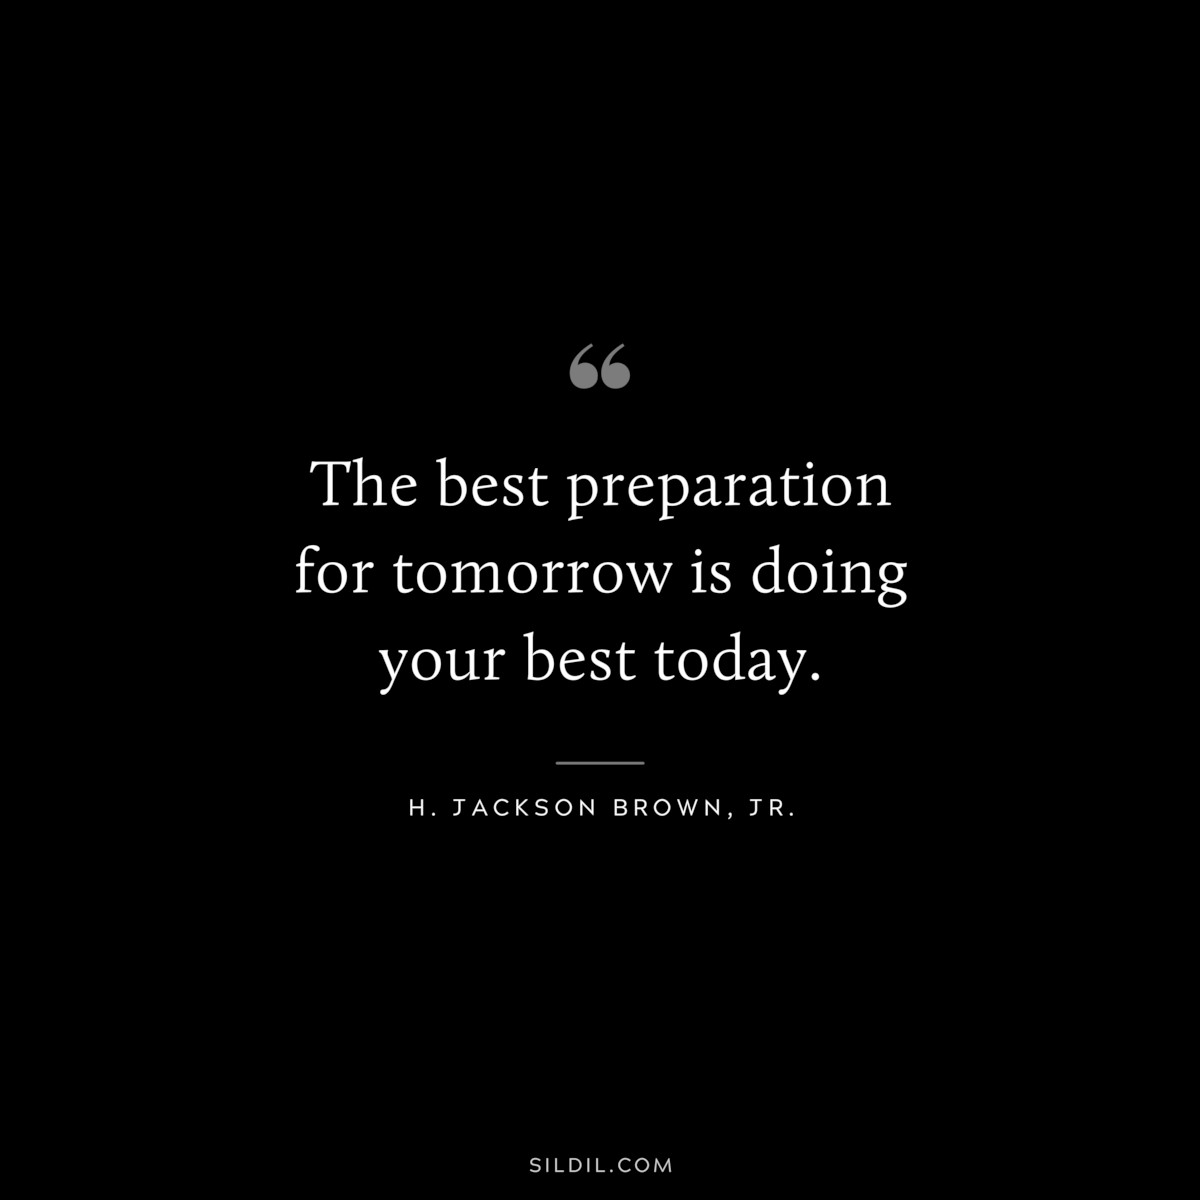 The best preparation for tomorrow is doing your best today. ― H. Jackson Brown, Jr.